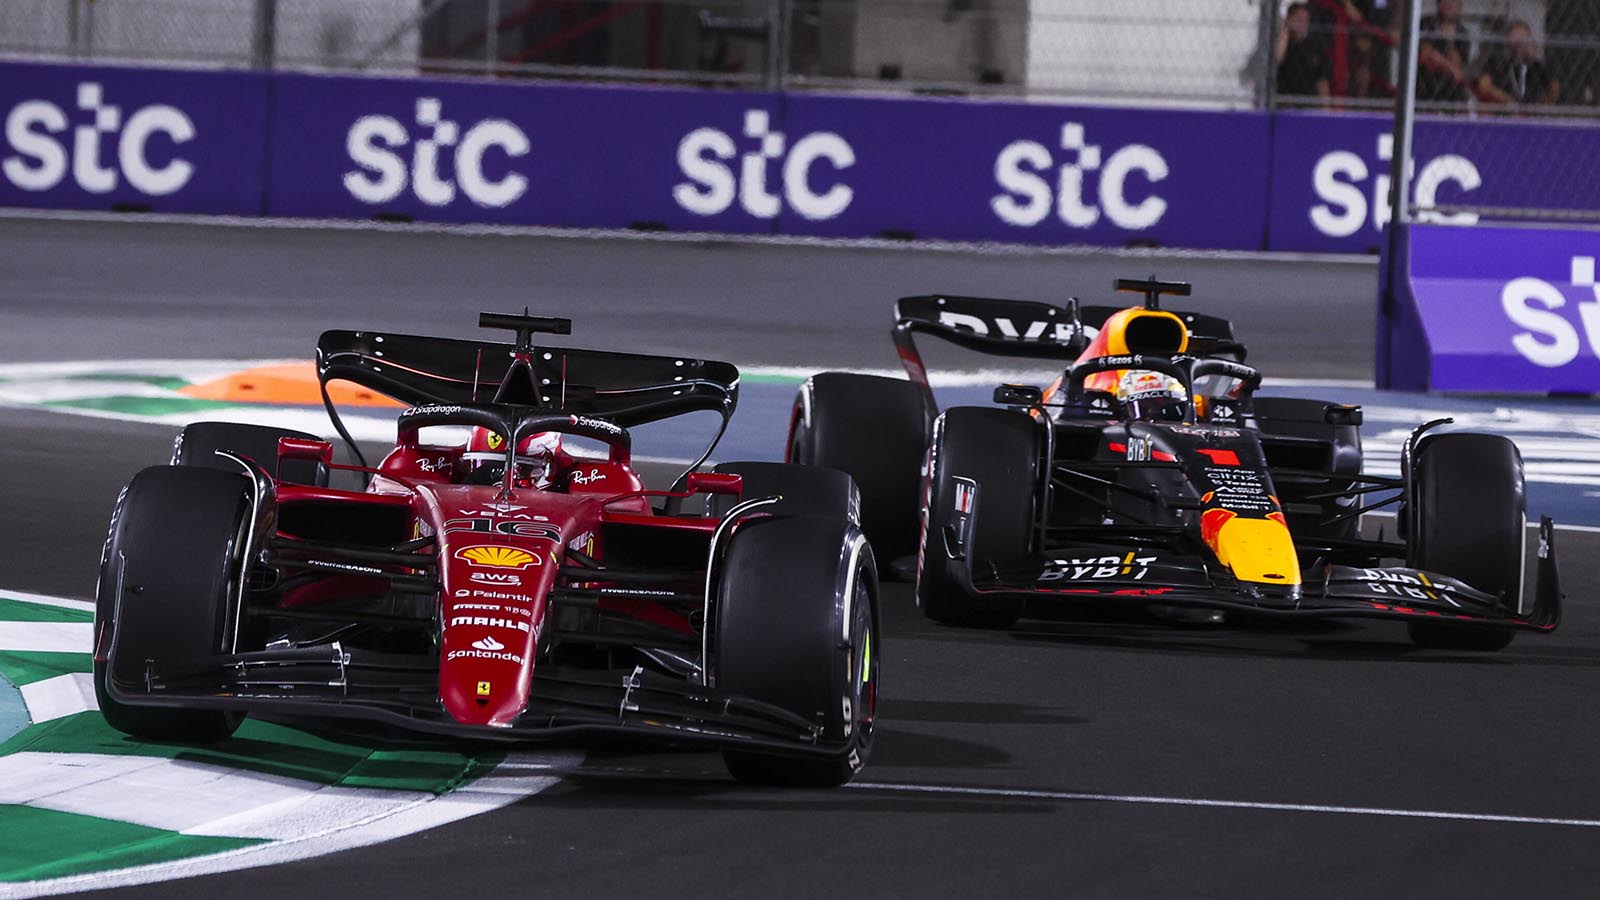 Charles Leclerc and Max Verstappen battle in Saudi. Jeddah March 2022